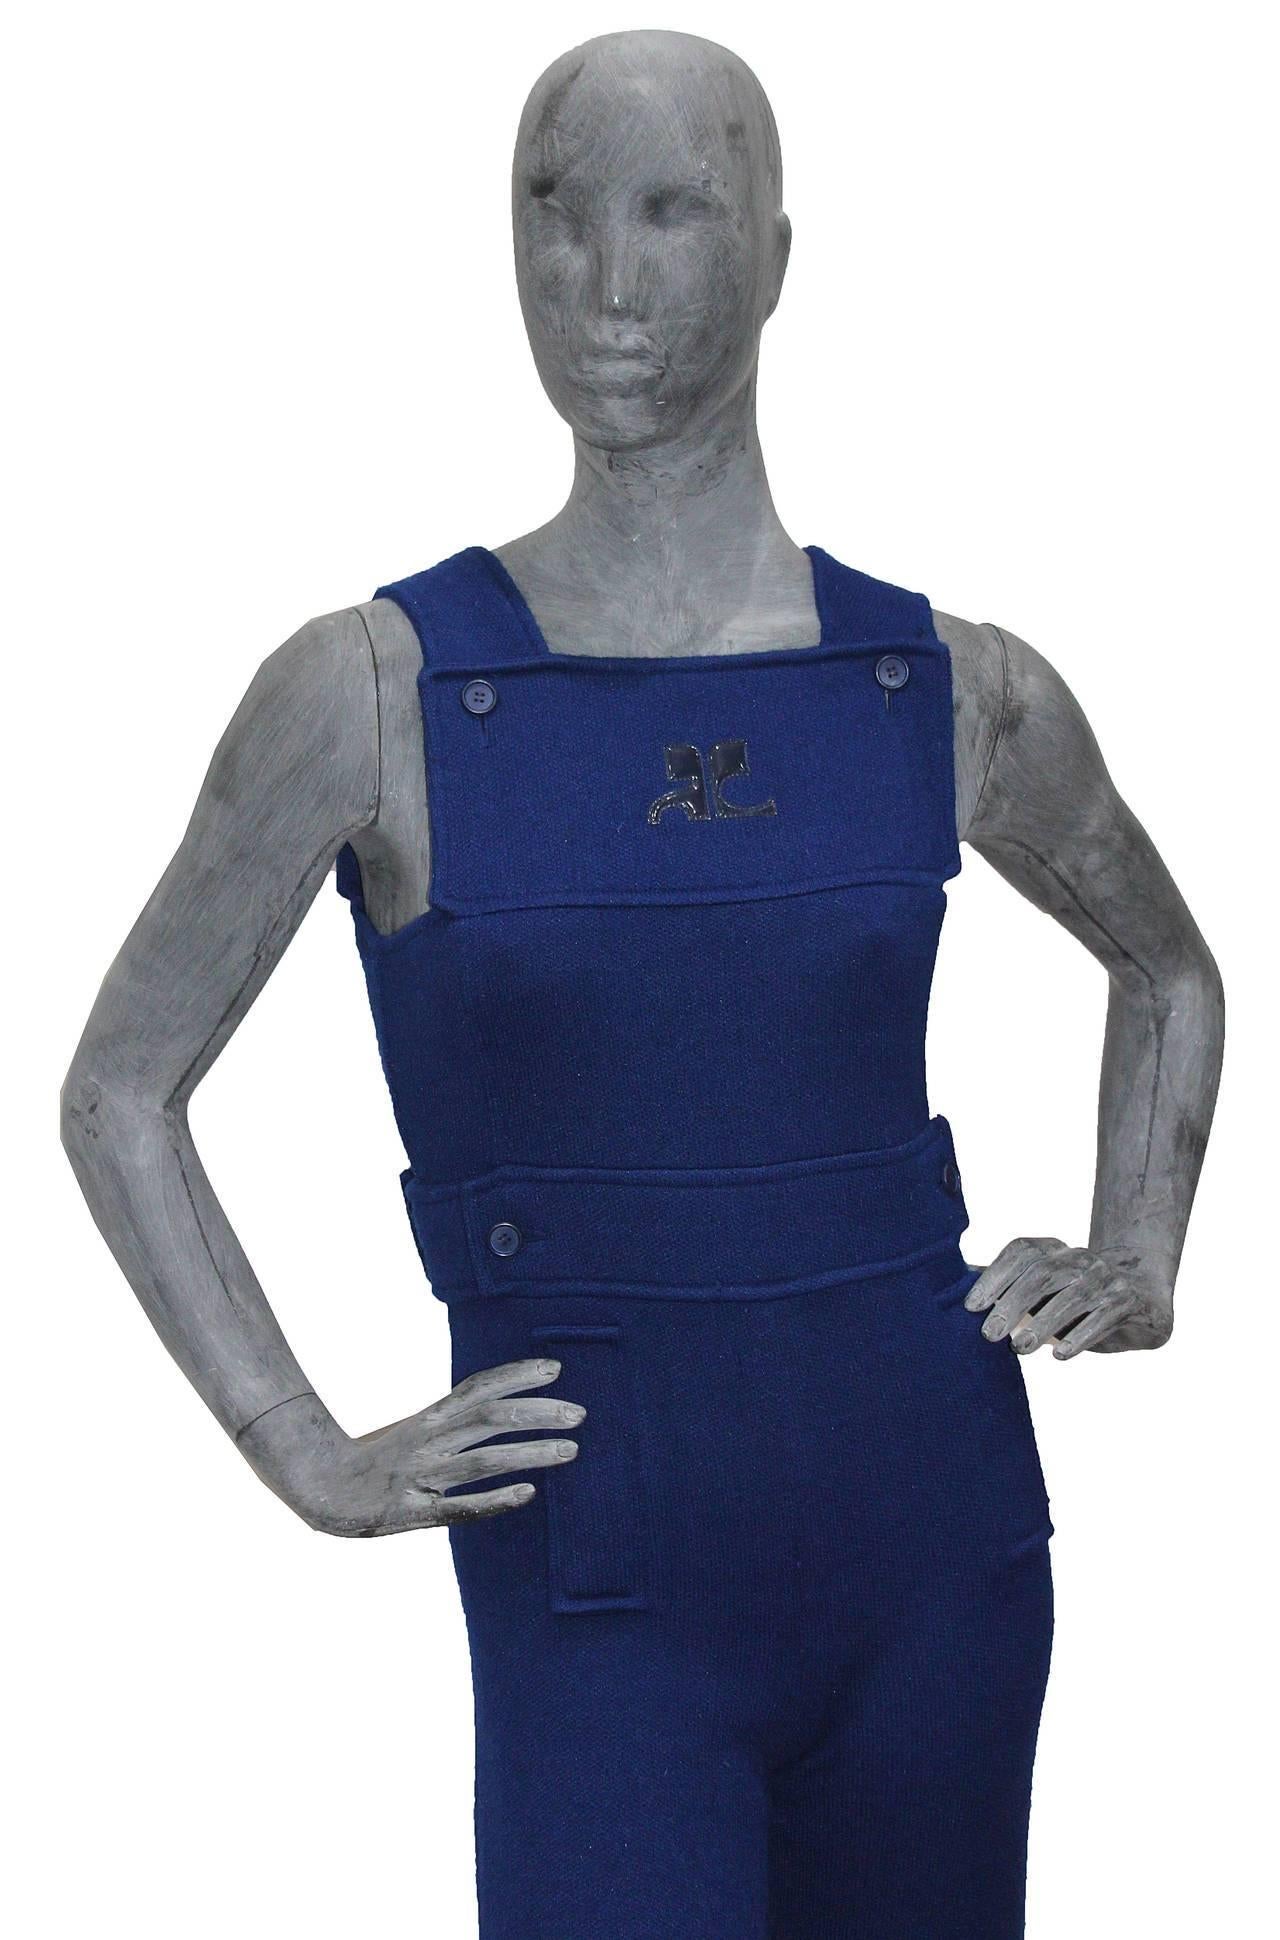 A 1971 Courreges Paris jumpsuit in the style of dungarees. The jumpsuit has flared trousers, side metal zip closure, two front decorative pockets and waist belt. The iconic 1960s patent 'AC' (Andre Courreges) logo features on the front of the